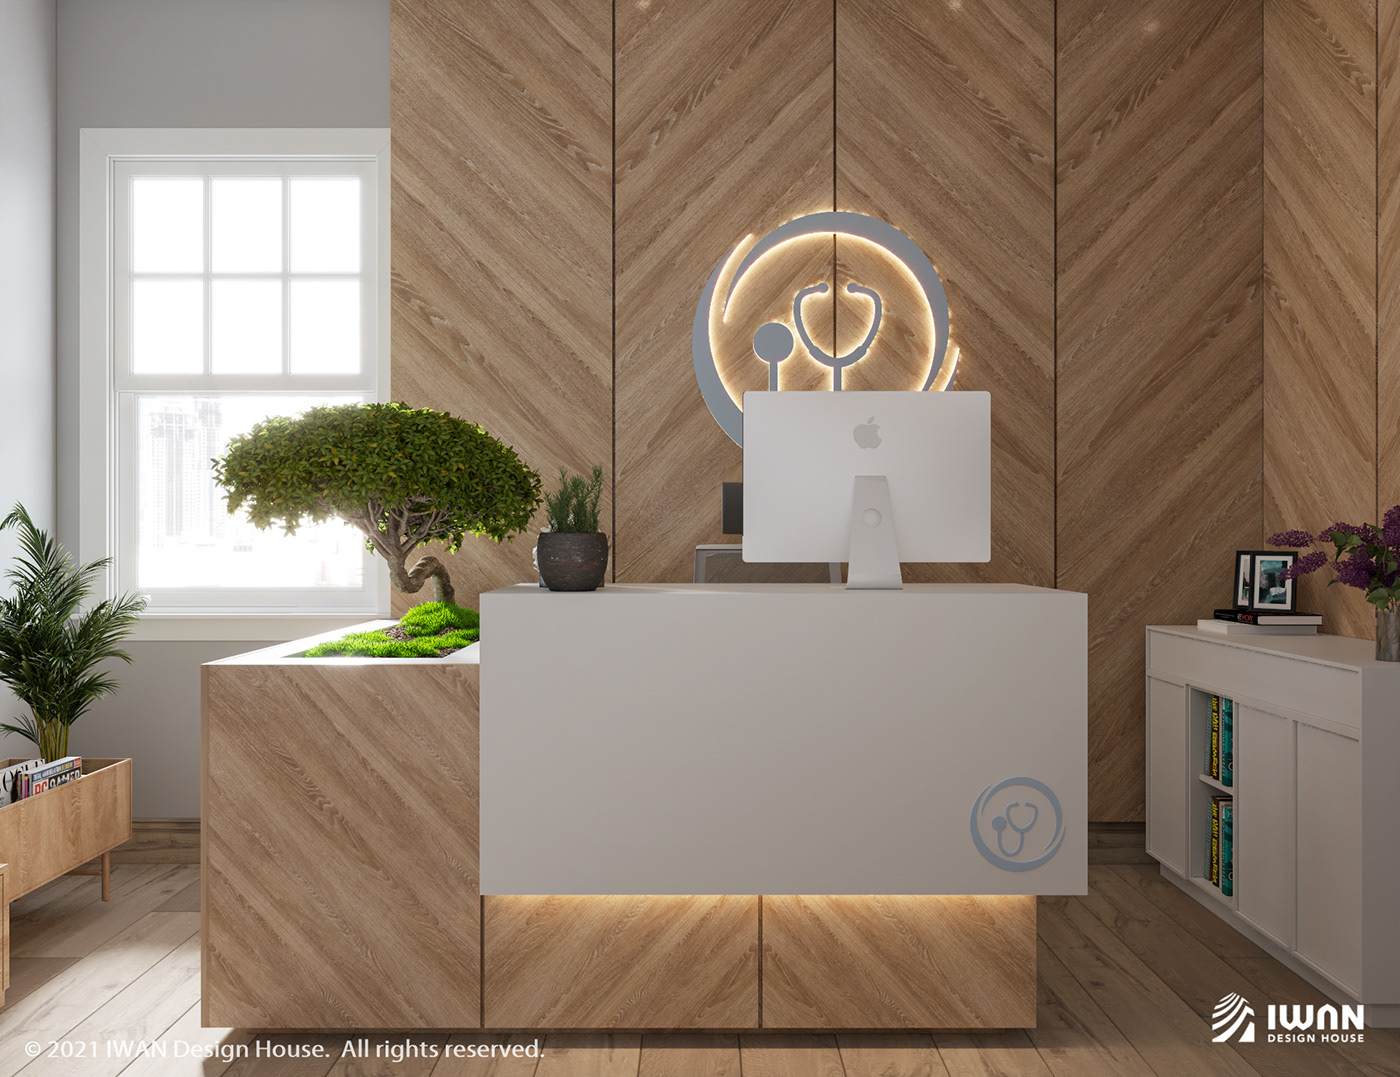 Interior design for clinic with modern style - Waiting Area